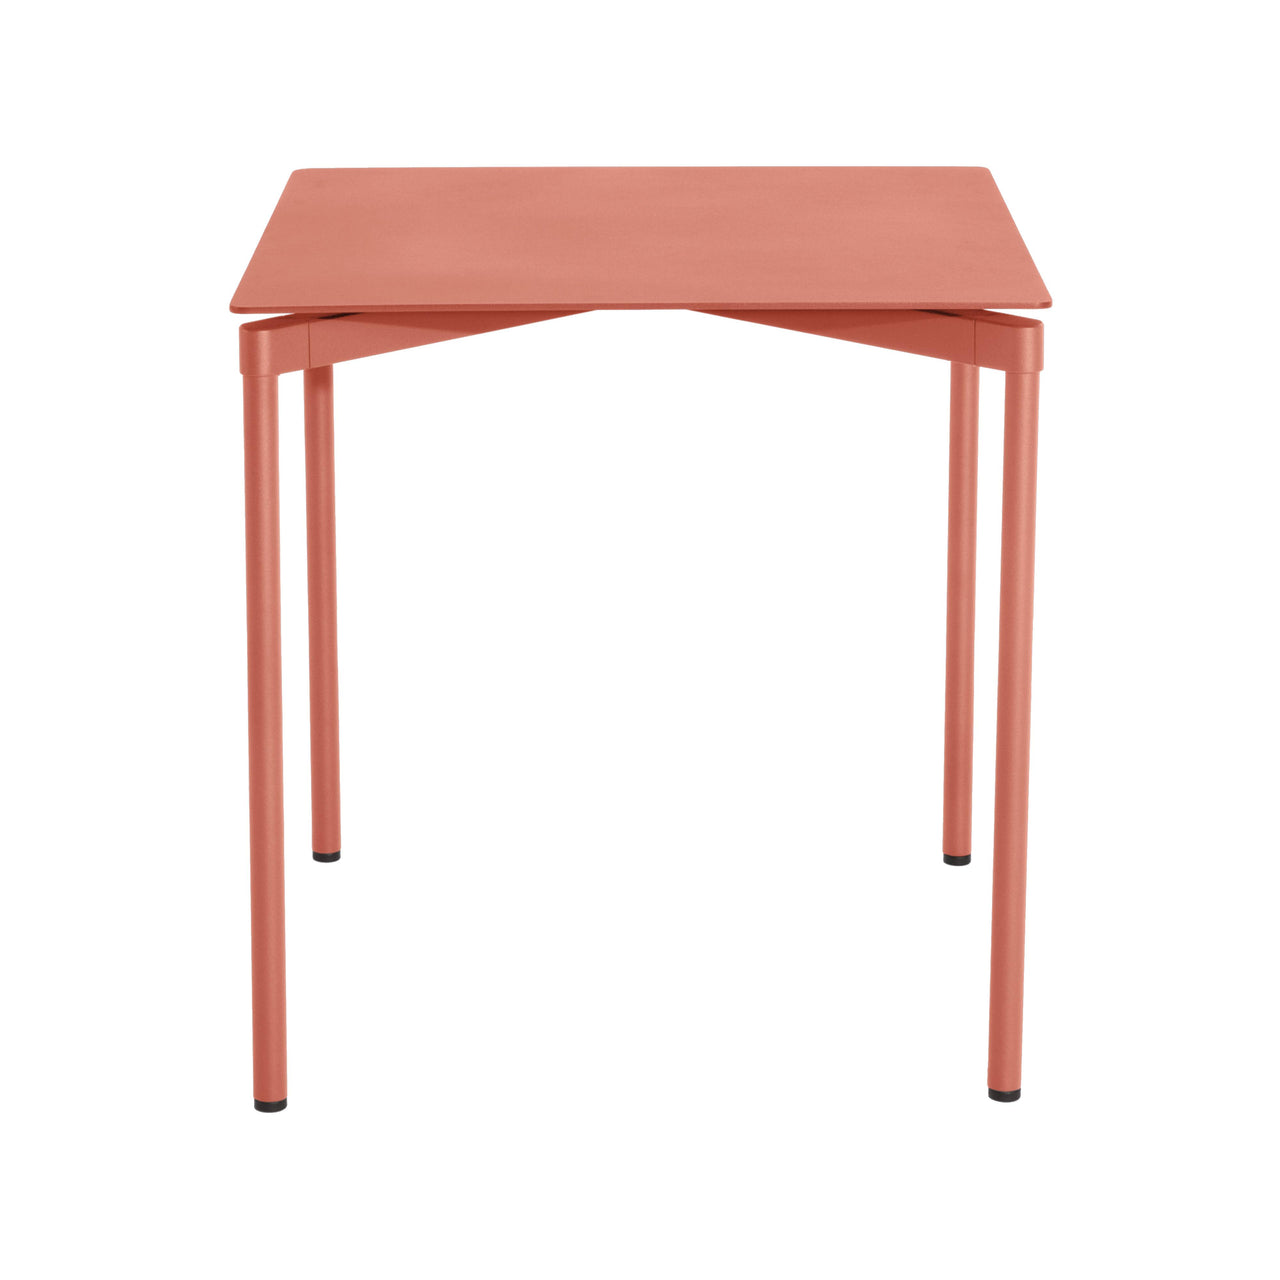 Fromme Table: Square + Coral